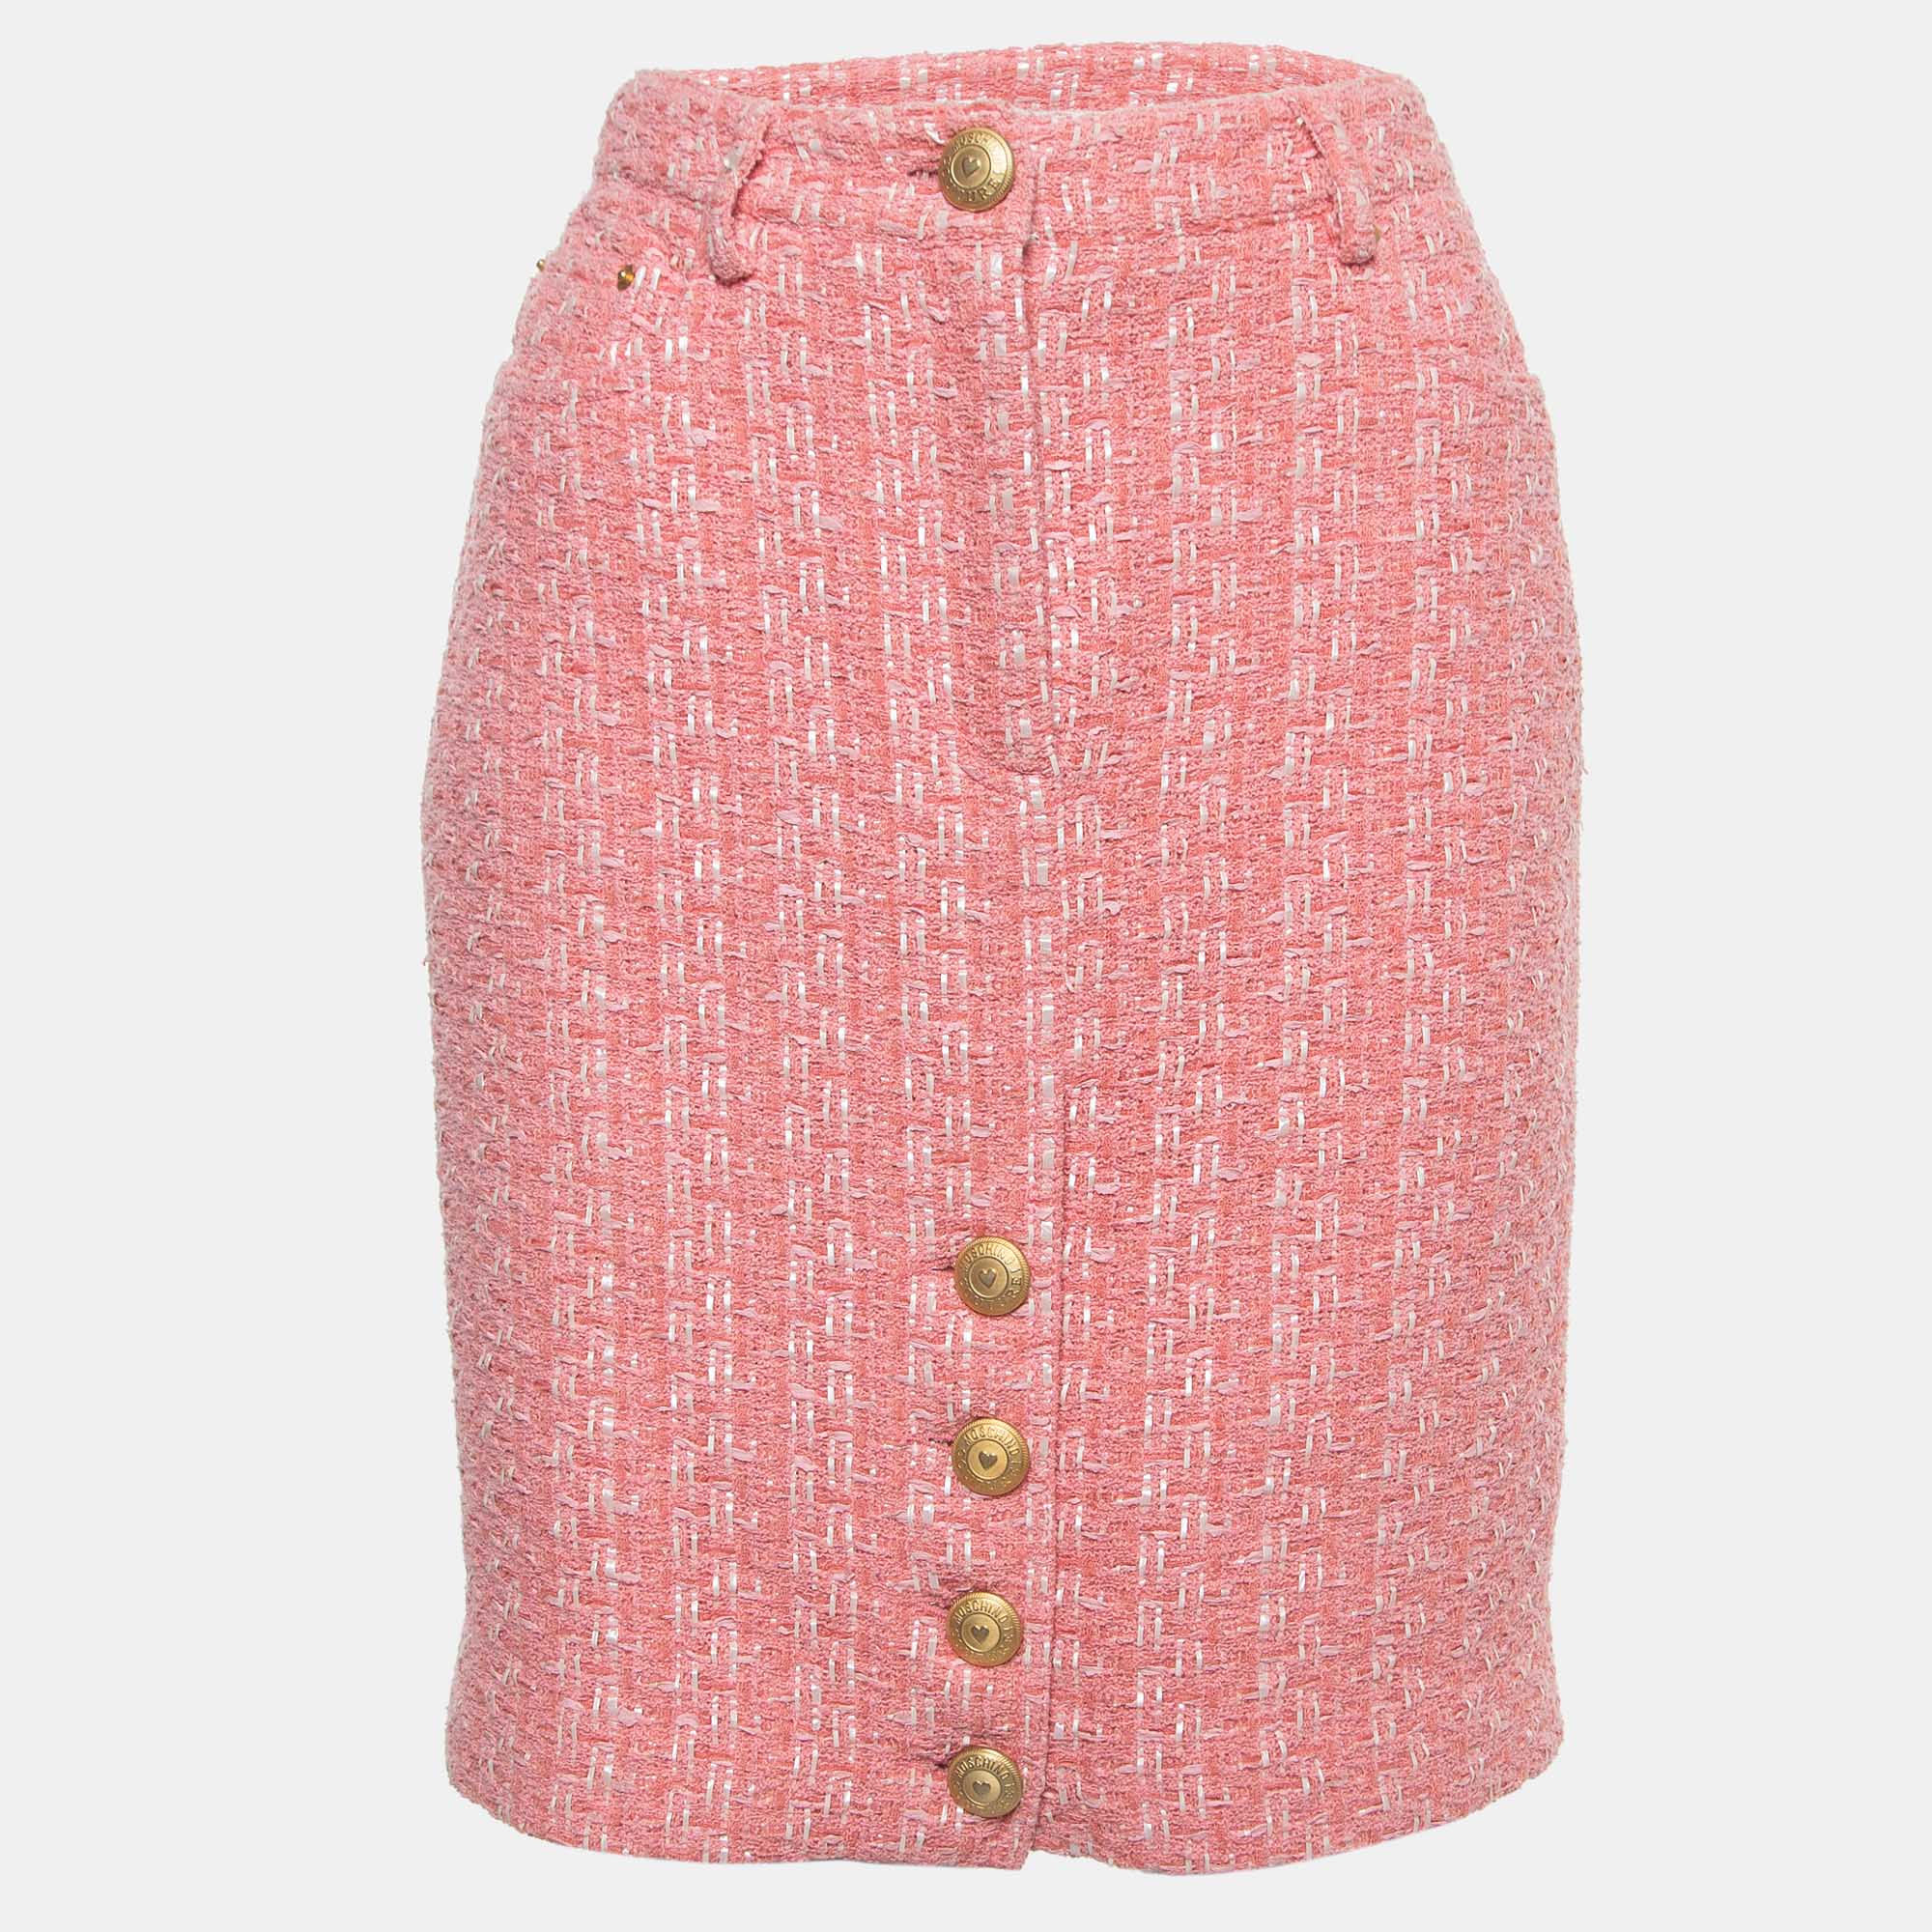 Moschino Couture Pink Tweed Gold-Button Skirt M